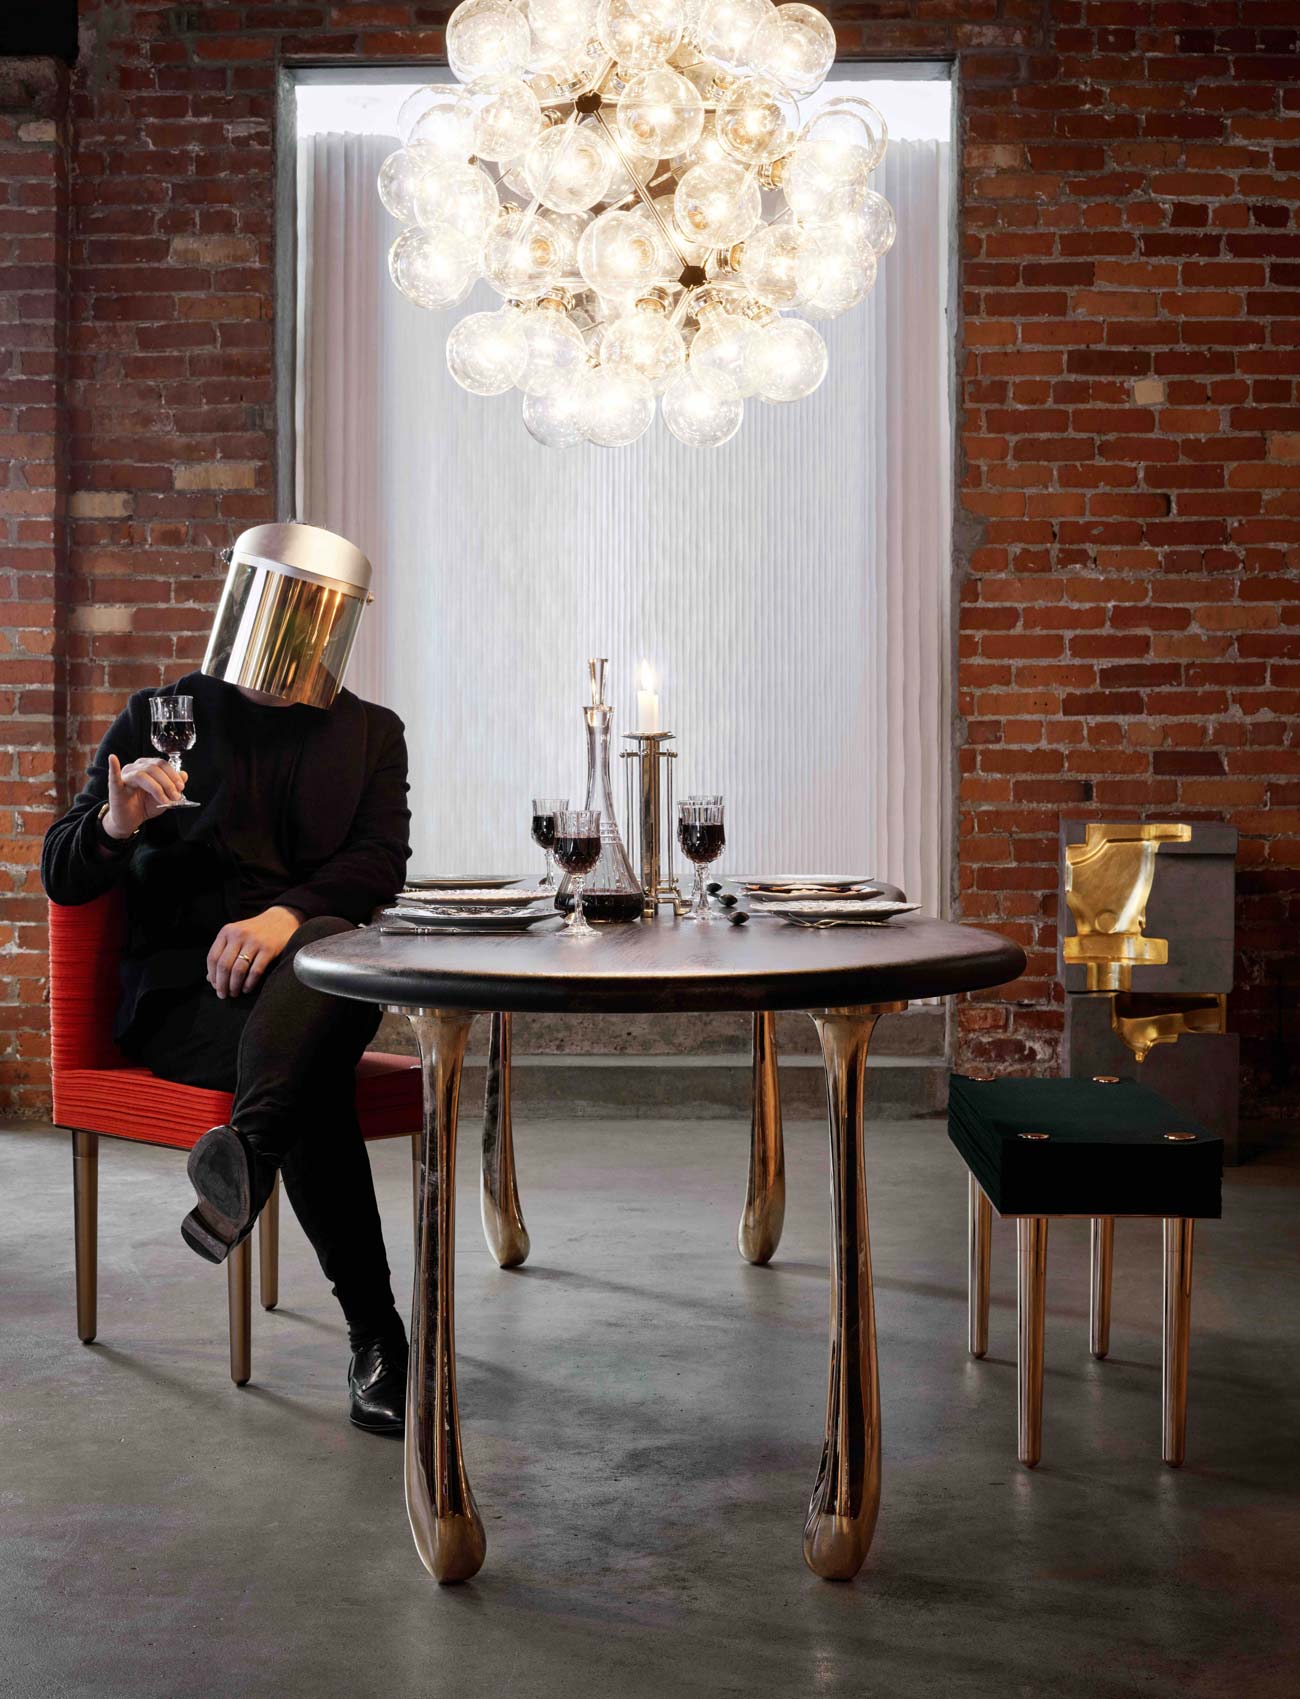 Forrest (masked) is sitting on a chair from Stacklab's Felt collection. The table, featuring oxidized oak top and mirror-polished bronze legs, is from their Jupiter collection. The light fixture is an original Castiglioni purchased from Porch Modern.